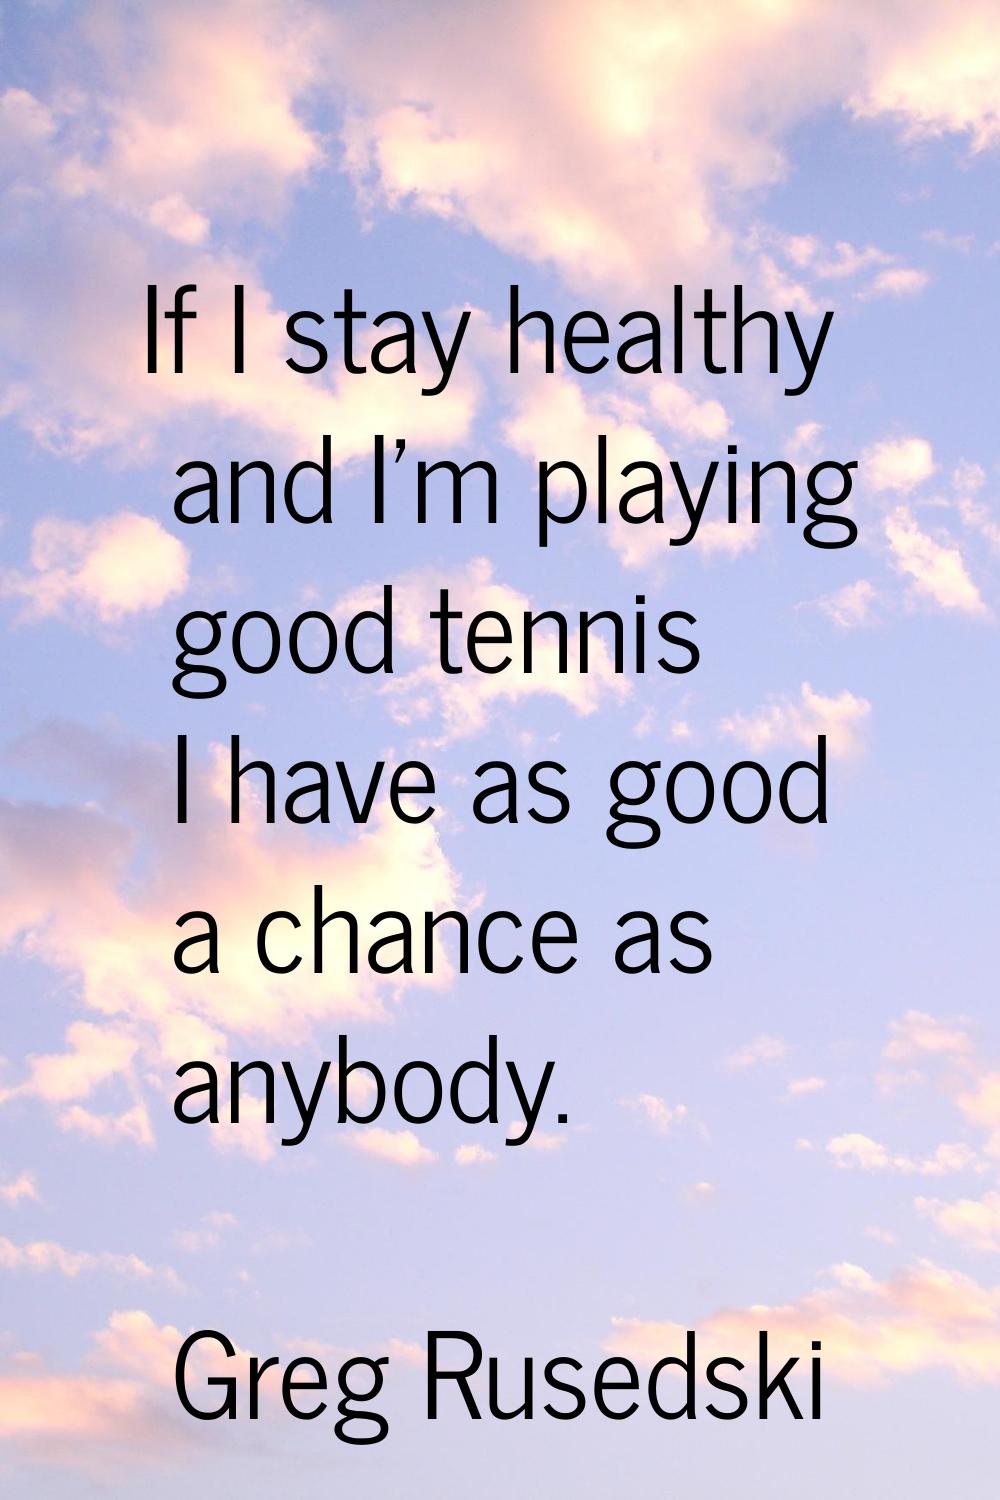 If I stay healthy and I'm playing good tennis I have as good a chance as anybody.